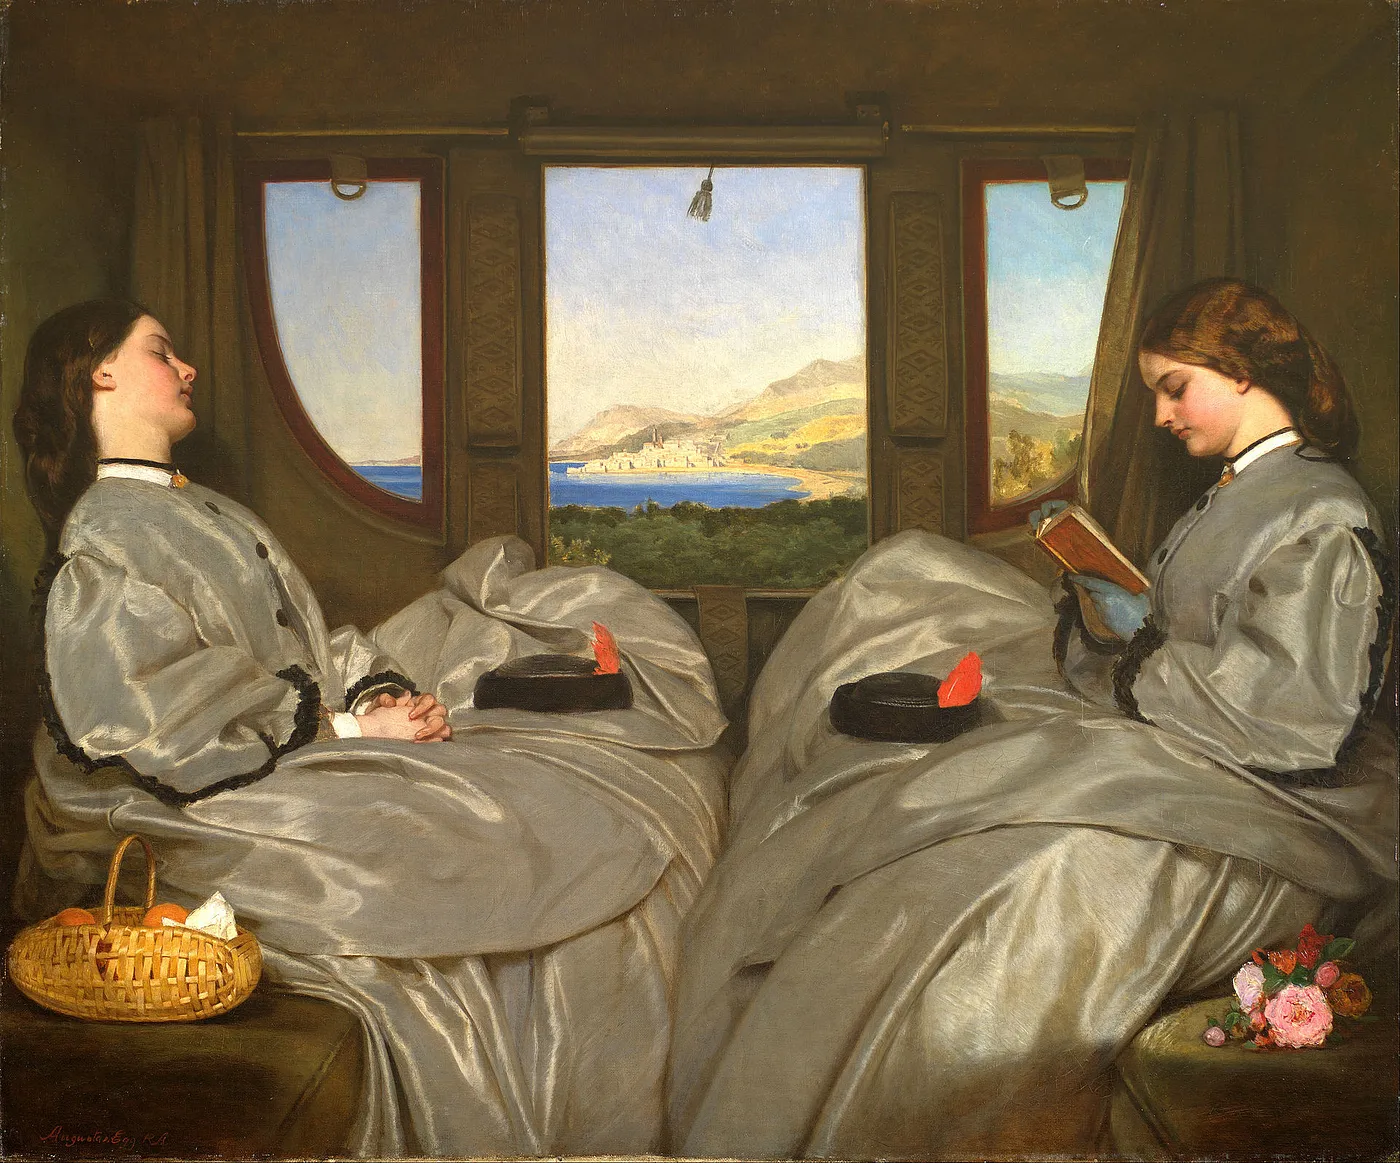 The Travelling Companions by Augustus Leopold Egg is an example of Railway Art that depicted the way the Railways revolutionized the movement of goods and people around the world